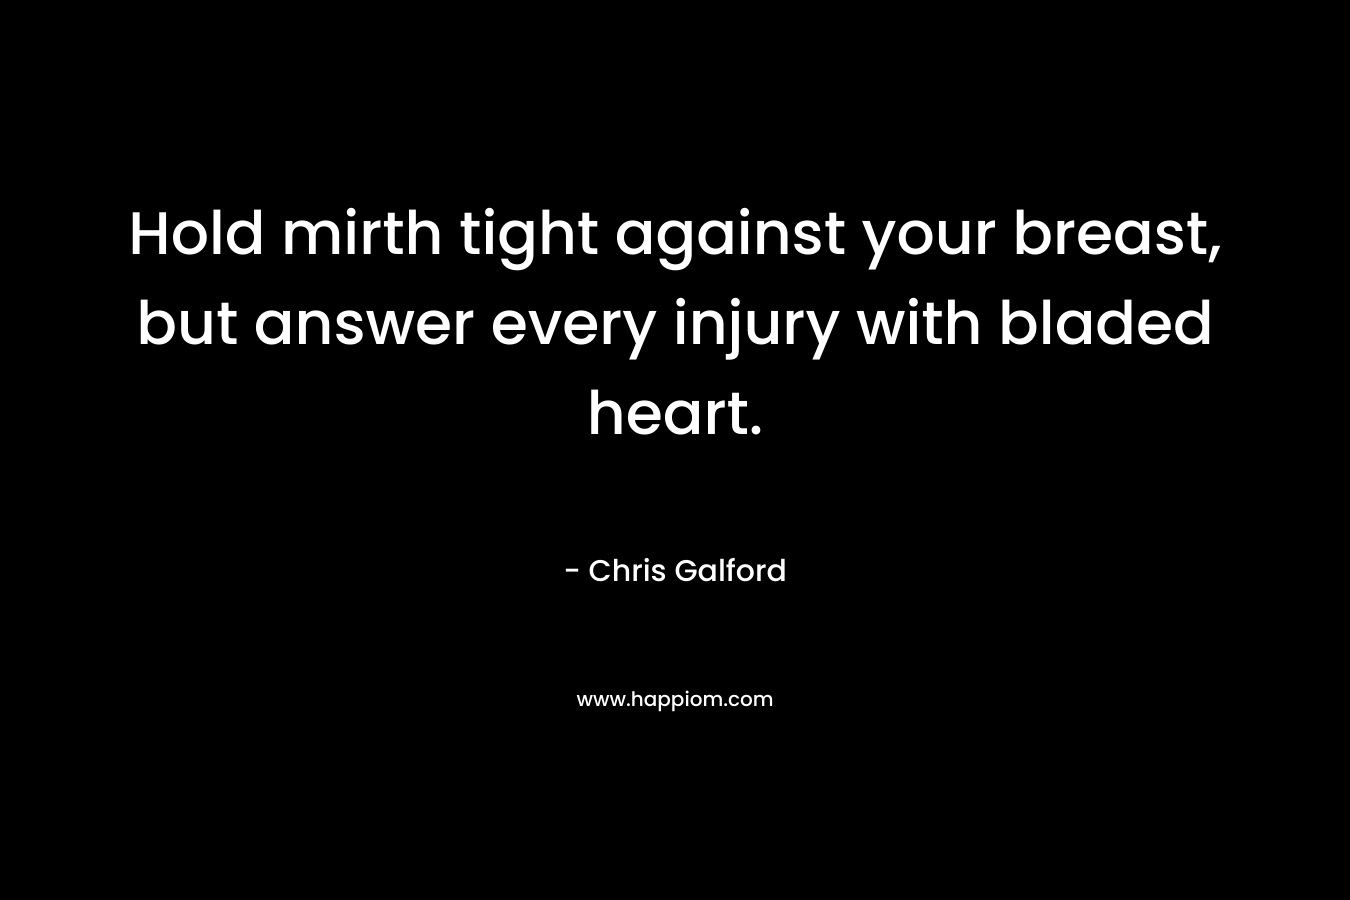 Hold mirth tight against your breast, but answer every injury with bladed heart.